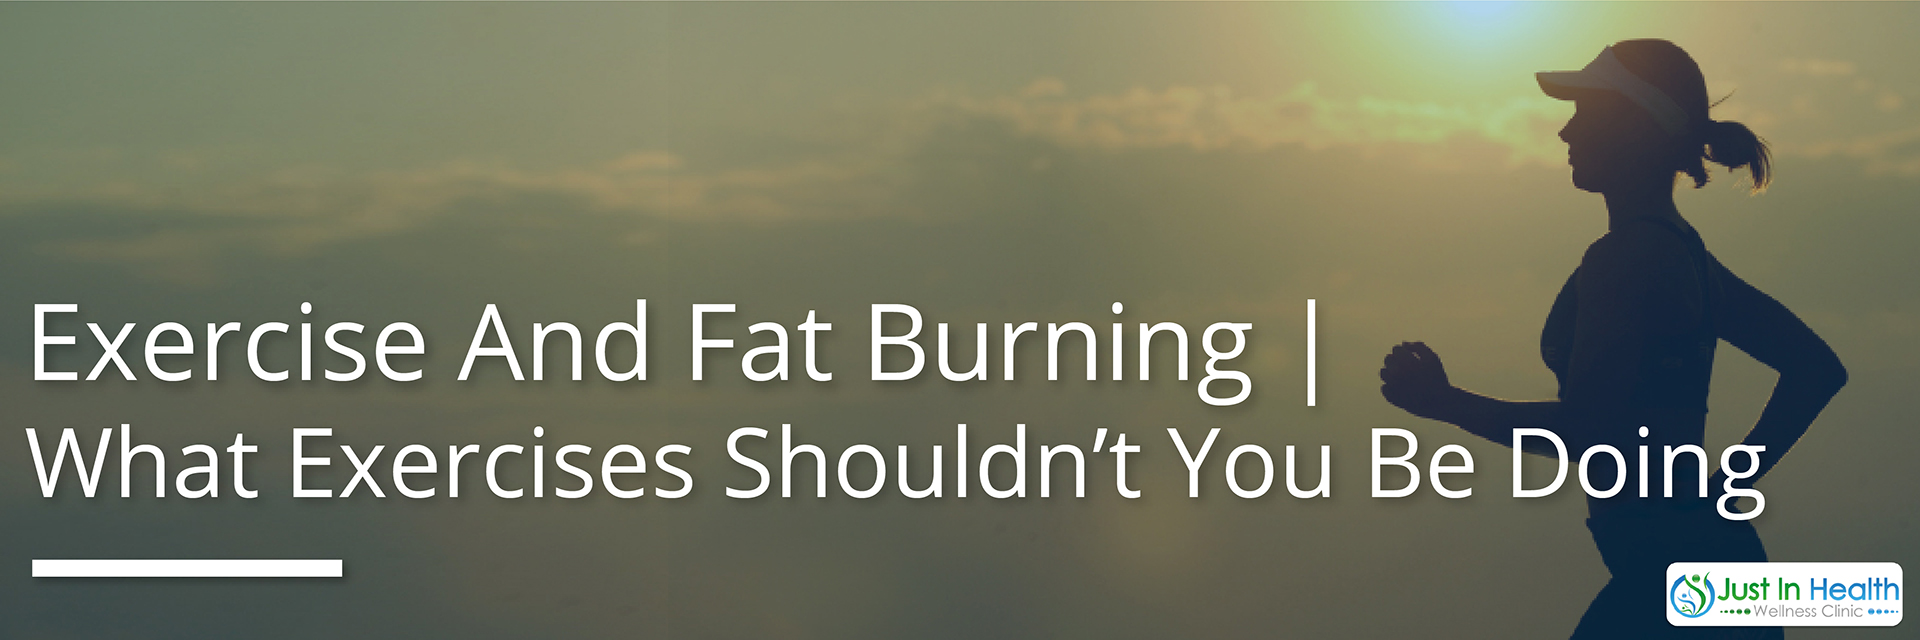  Exercise And Fat Burning